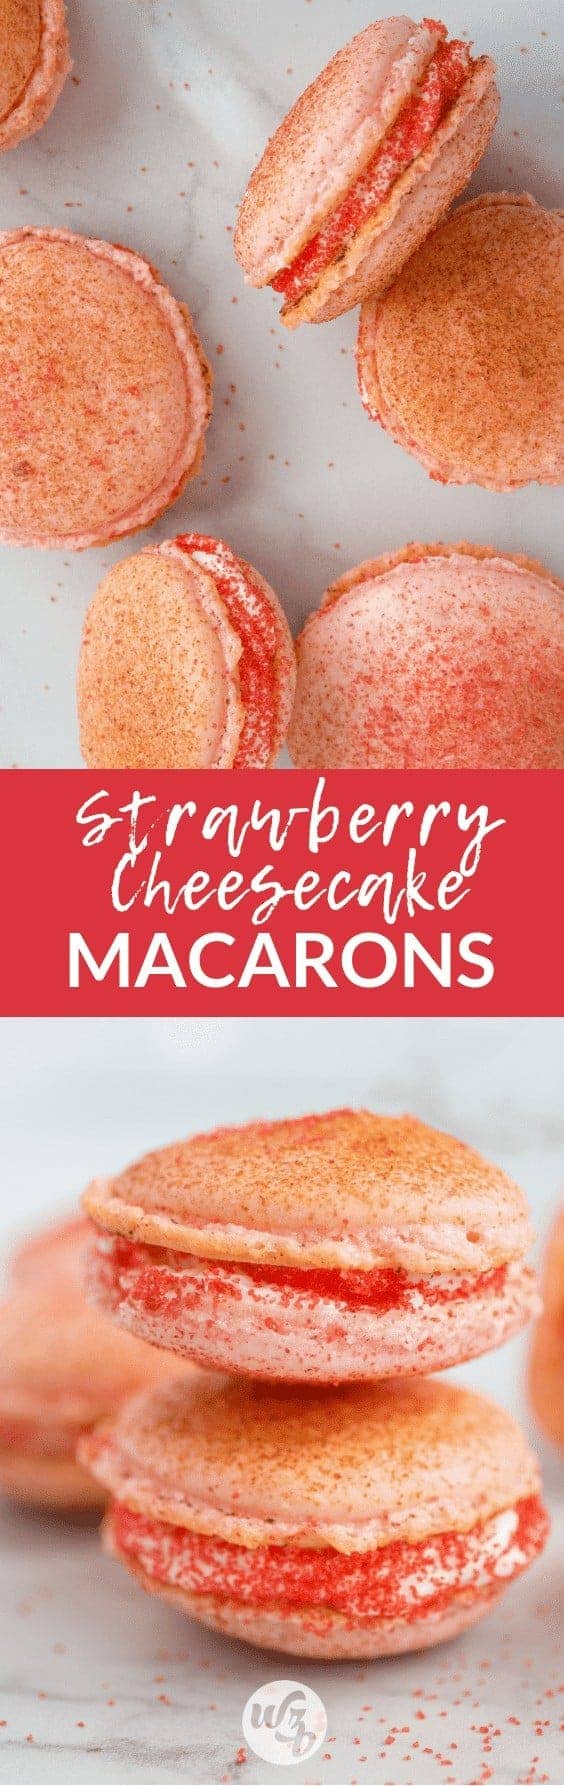 Long Pinterest pin for strawberry cheesecake macarons.